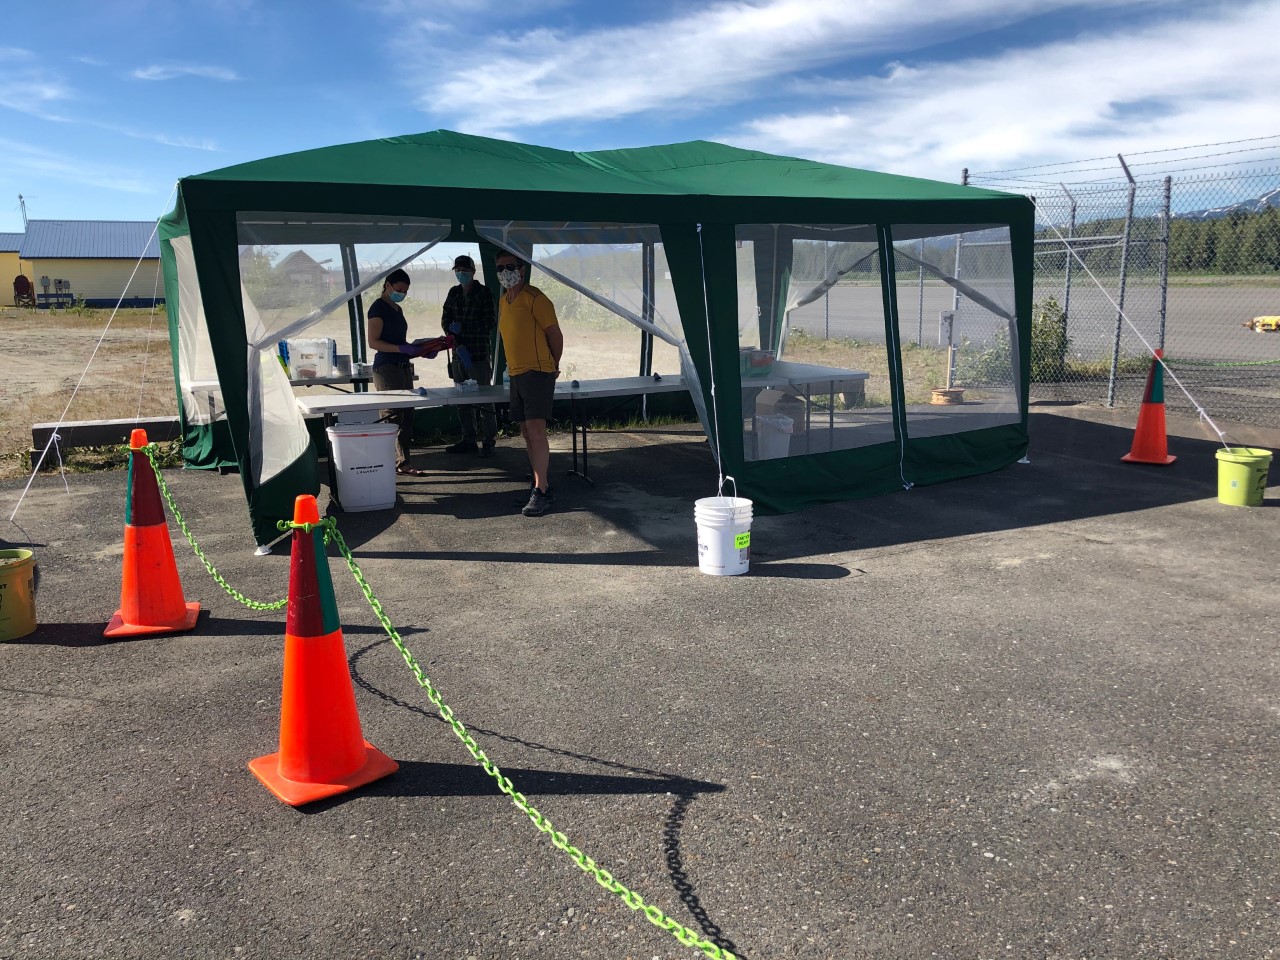 The COVID-19 testing station at the Gustavus airport on June 12, 2020. (Photo courtesy of Melanie Lesh)